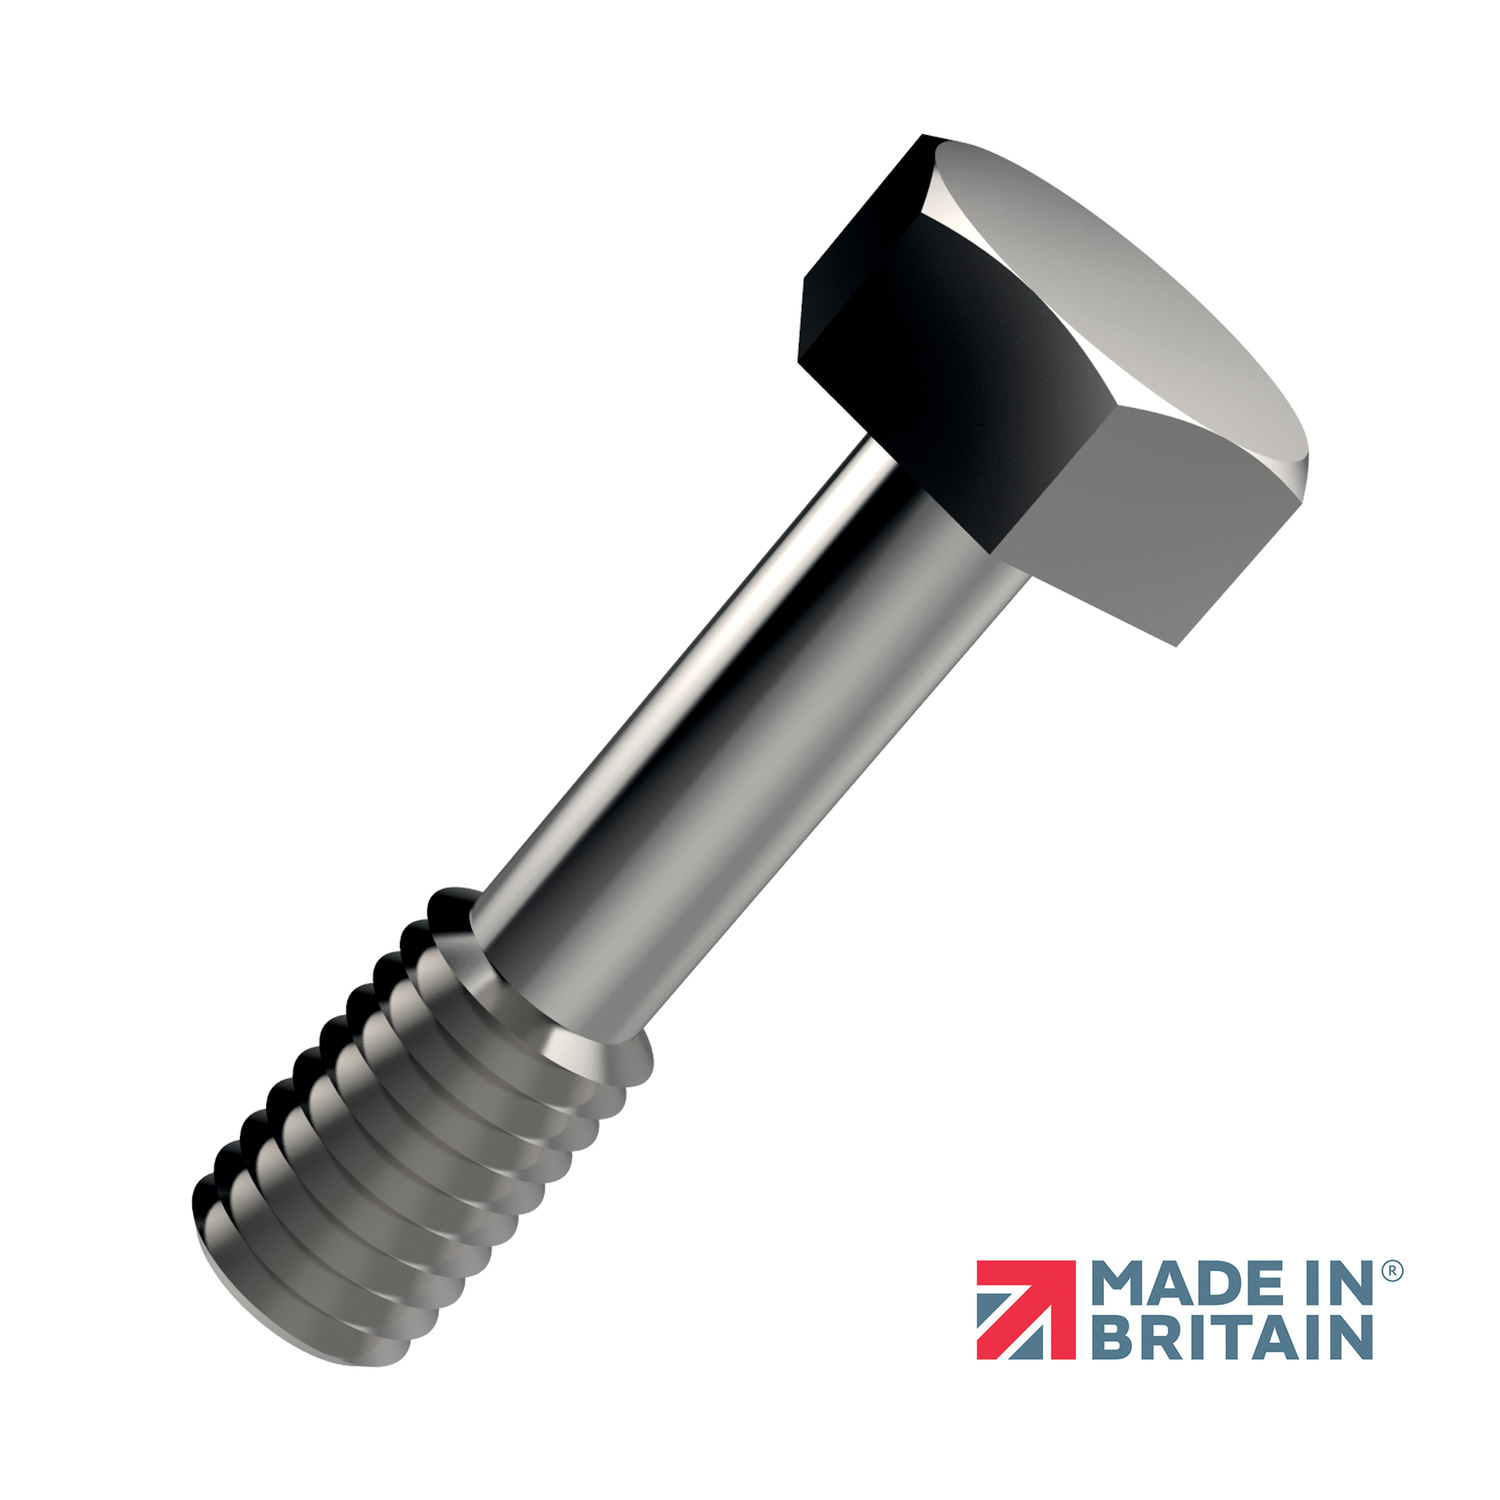 Captive Screws - Hex Bolts Our standard range of captive hex bolts come in thread sizes M3 - M12 and lengths 10 - 80mm to suit customer applications. Wide variety of materials and finishes available in stock or on request.